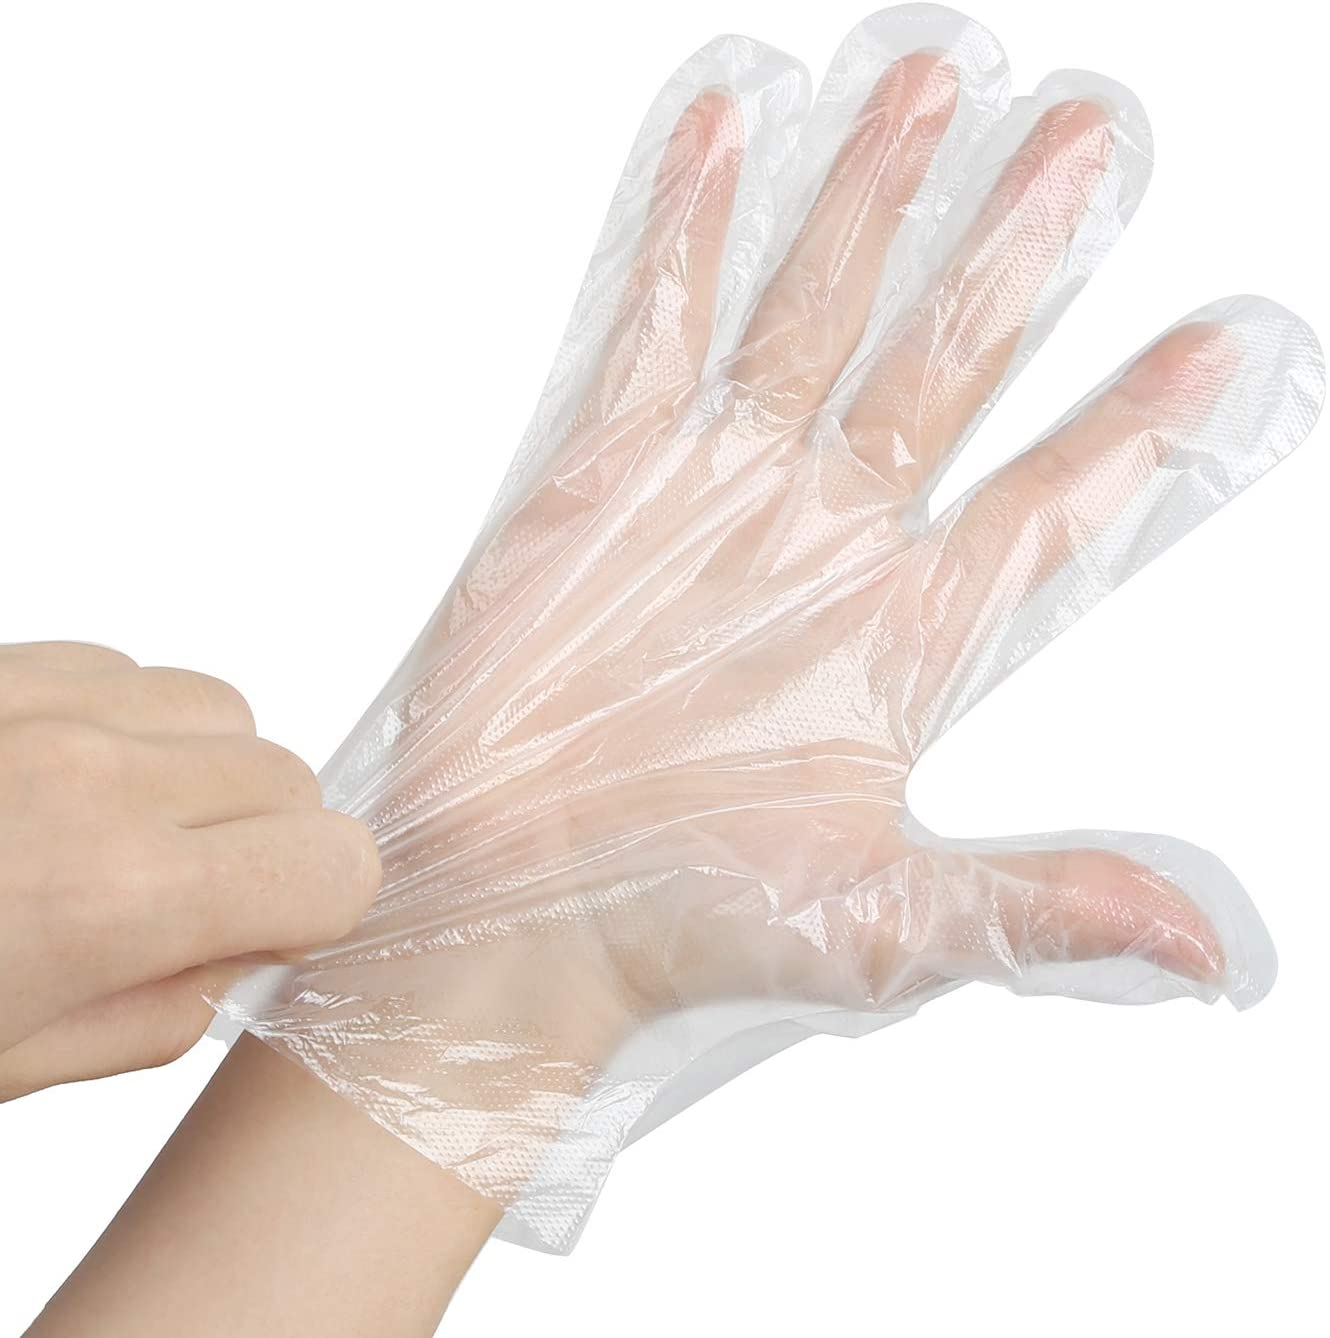 Disposable Plastic Gloves (One Size) (3p per glove)